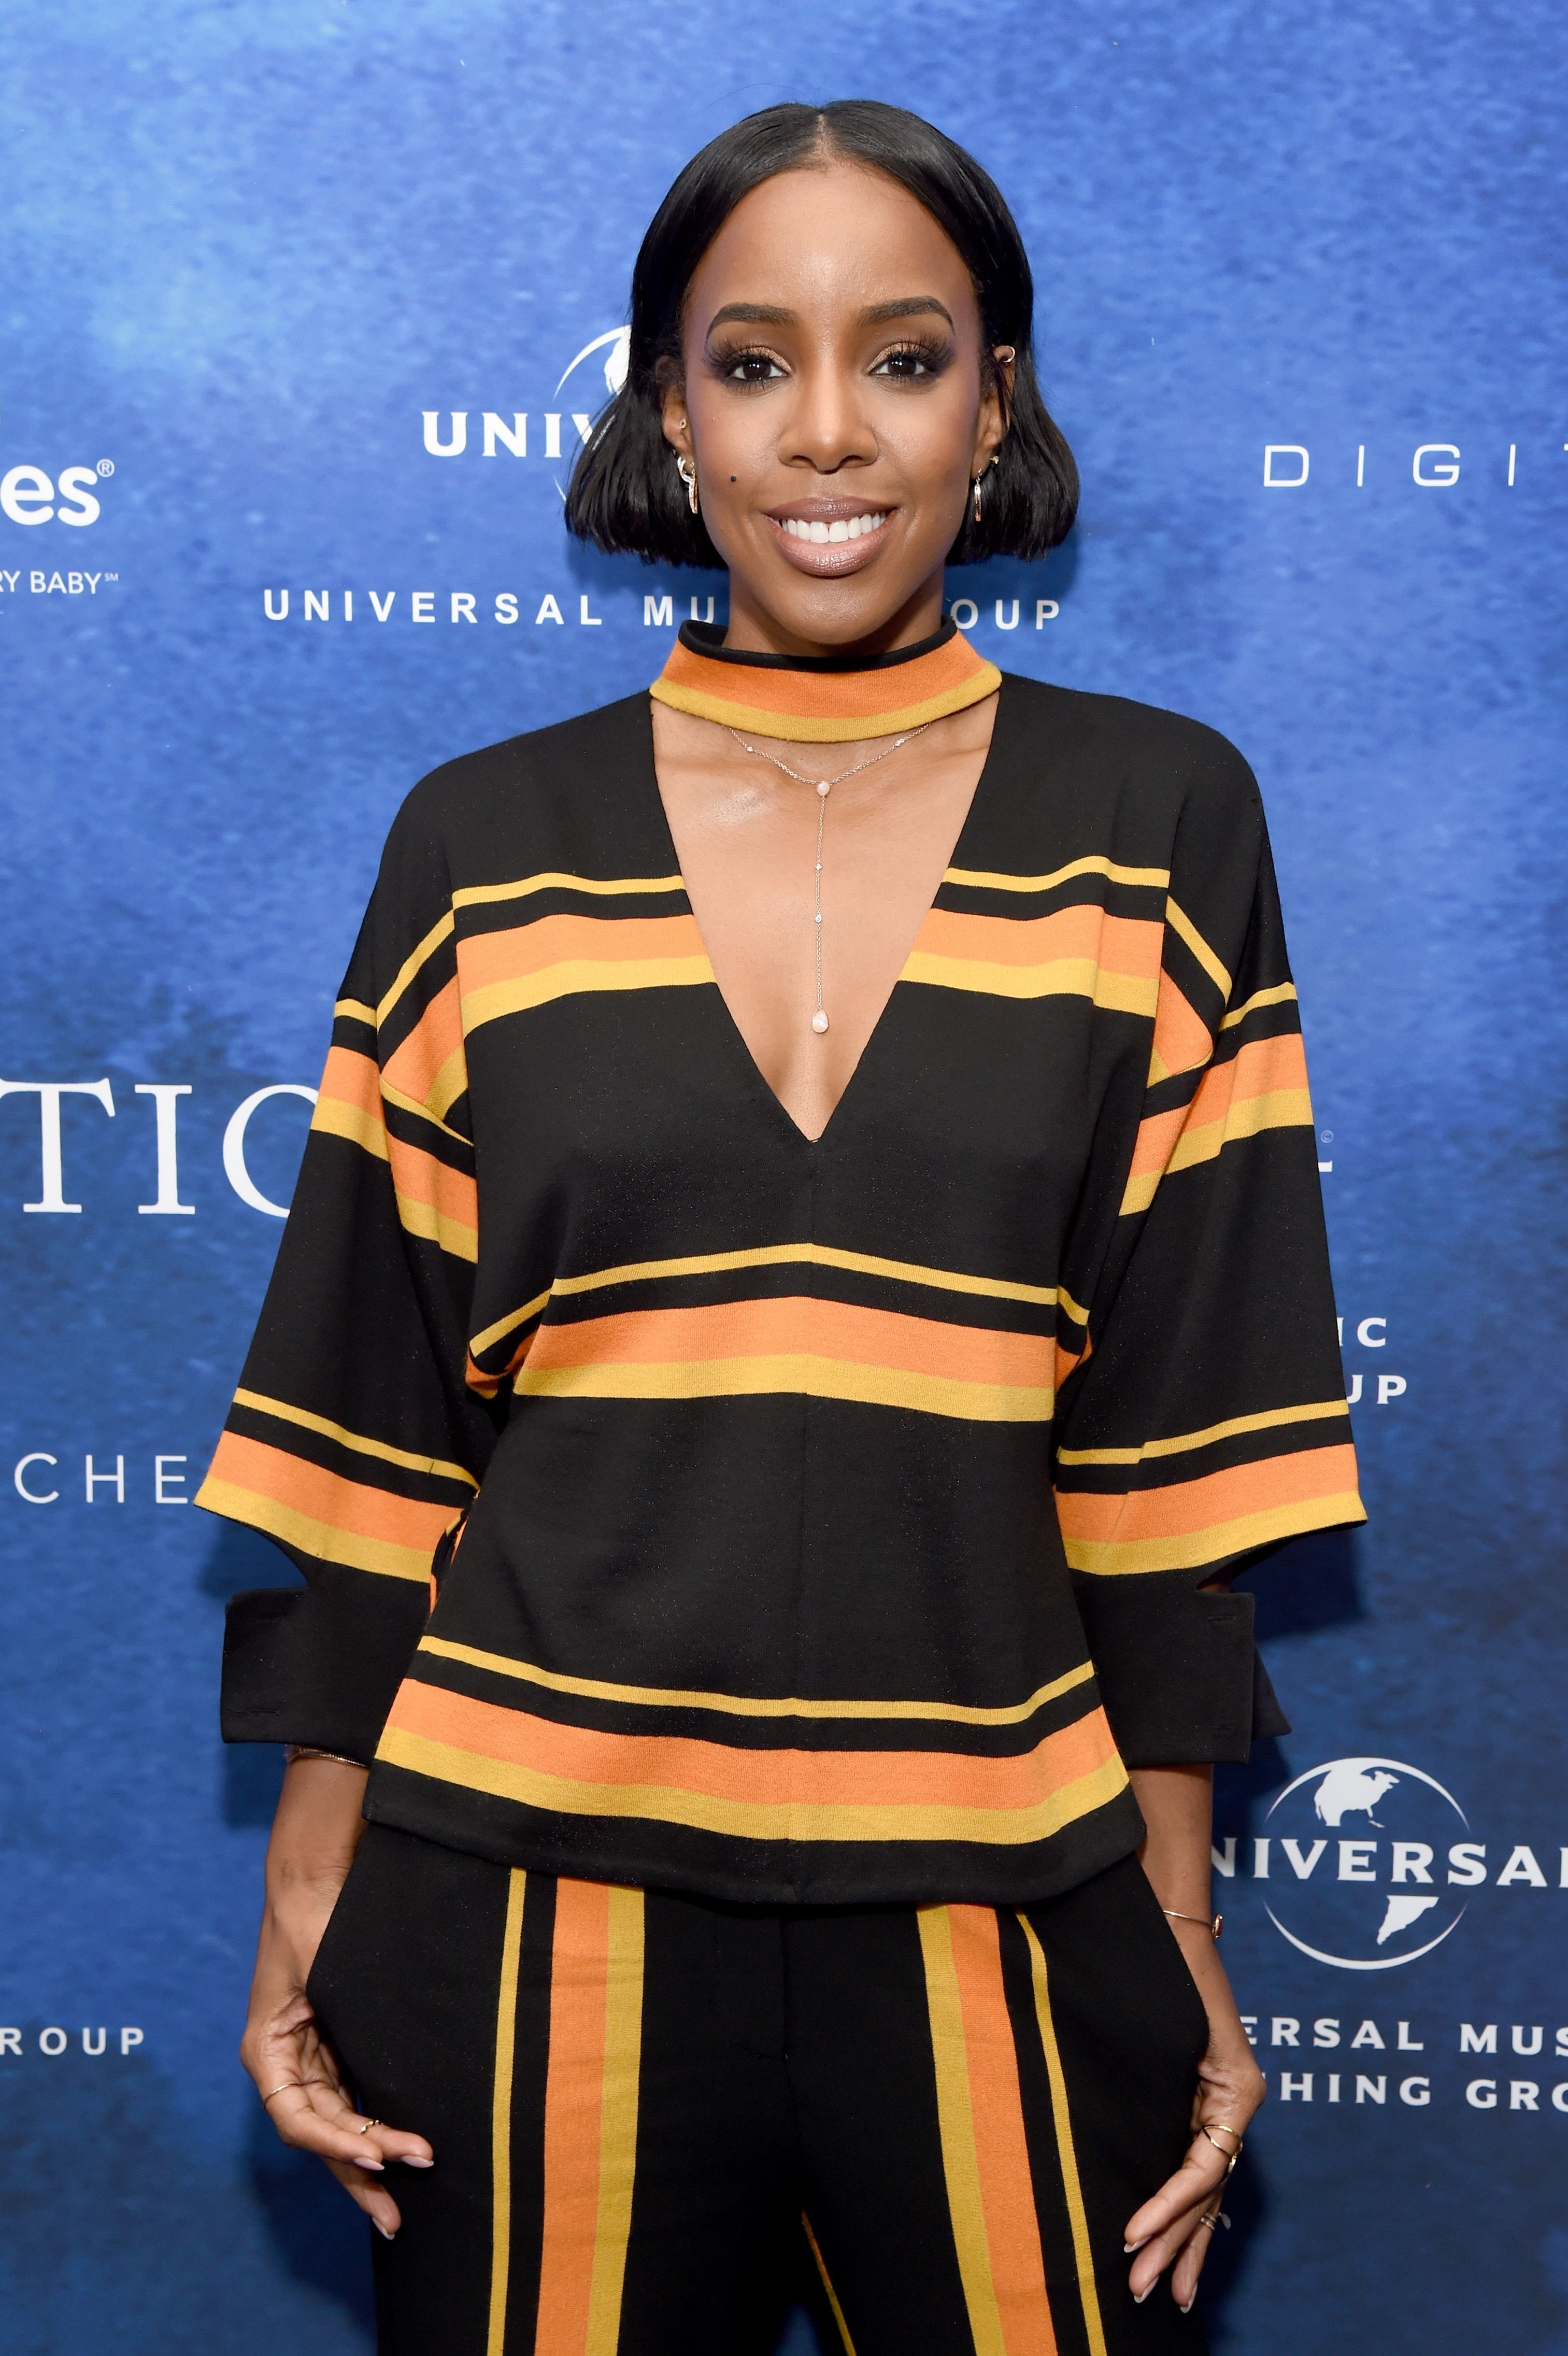 Kelly Rowland during the 2016 March of Dimes Celebration of Babies at the Beverly Wilshire Four Seasons Hotel on December 9, 2016 in Beverly Hills, California. | Source: Getty Images